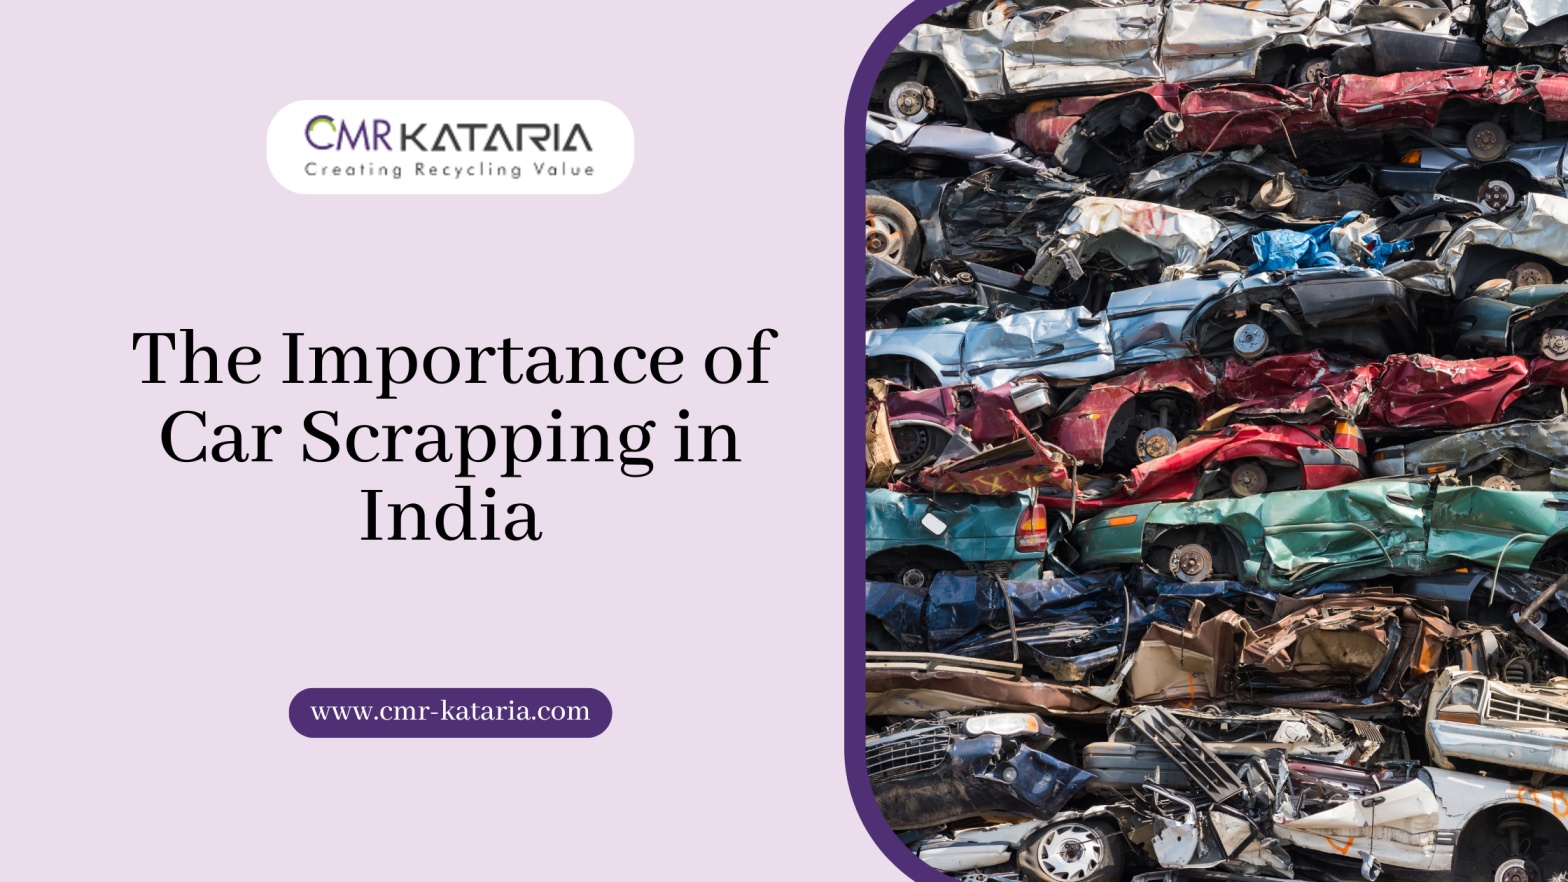 The Importance of Car Scrapping in India